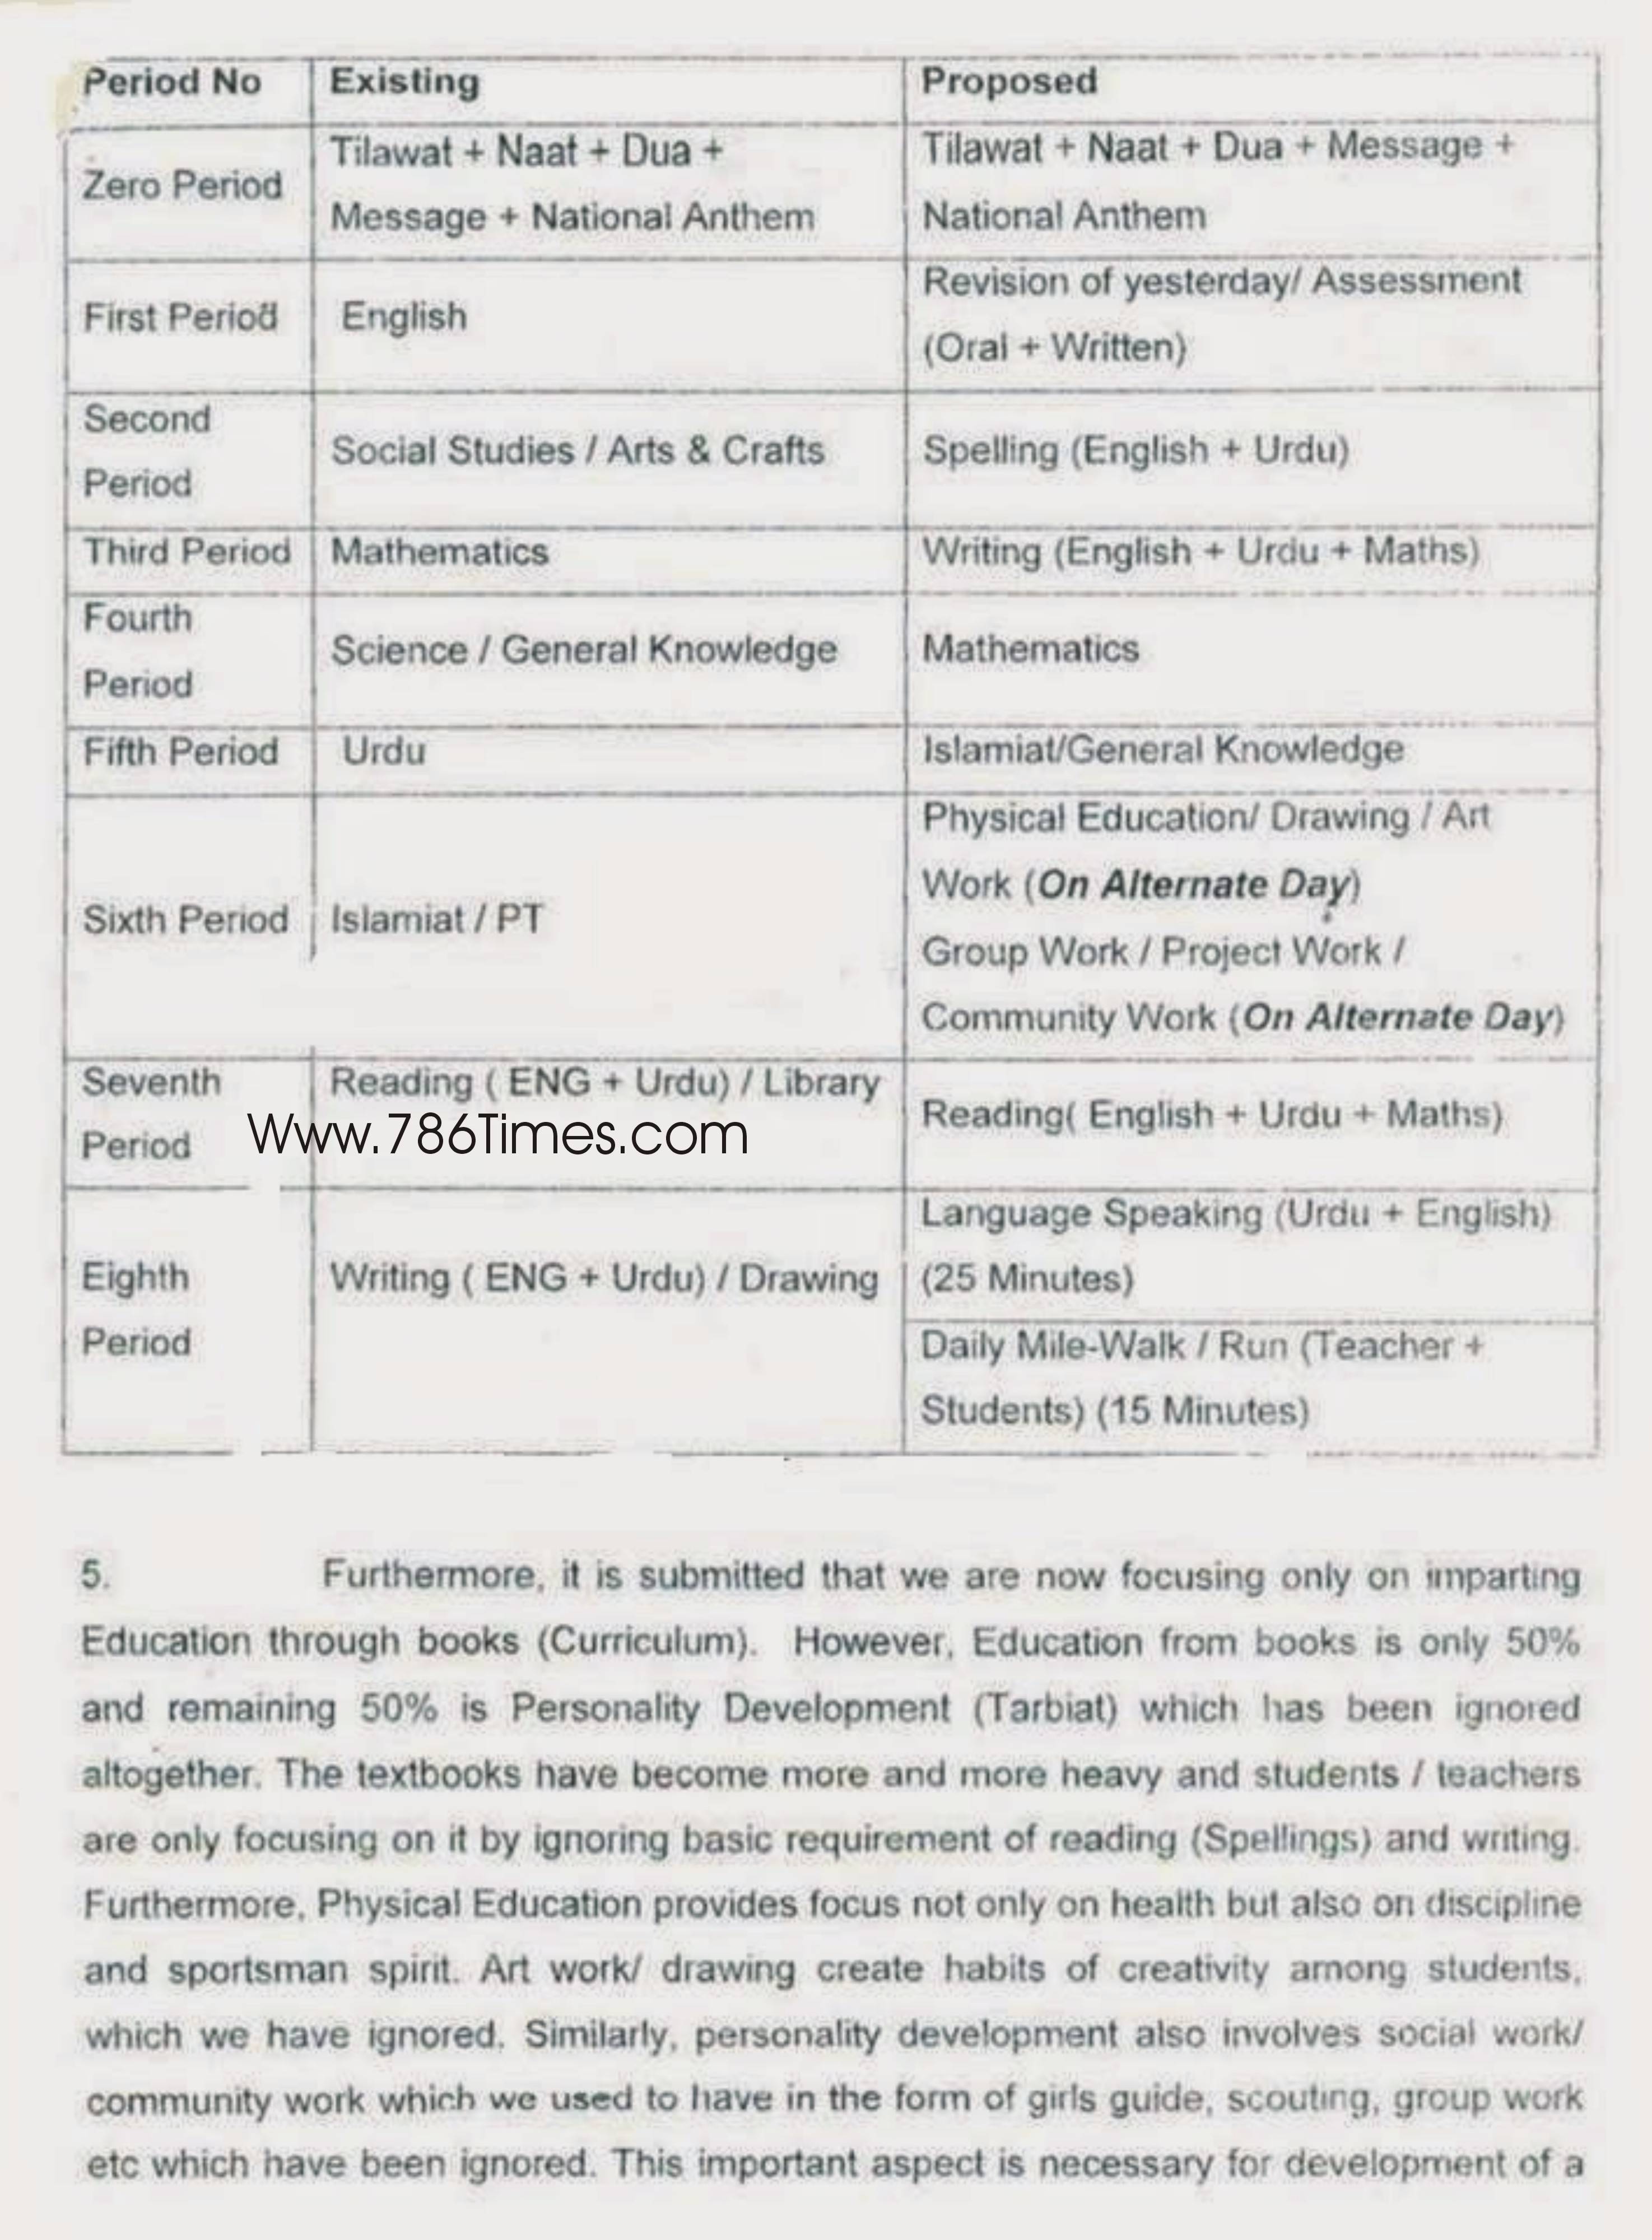 CHANGE IN EXISTING TEACHING TIMETABLE FOR LOWER CLASSES 1-3